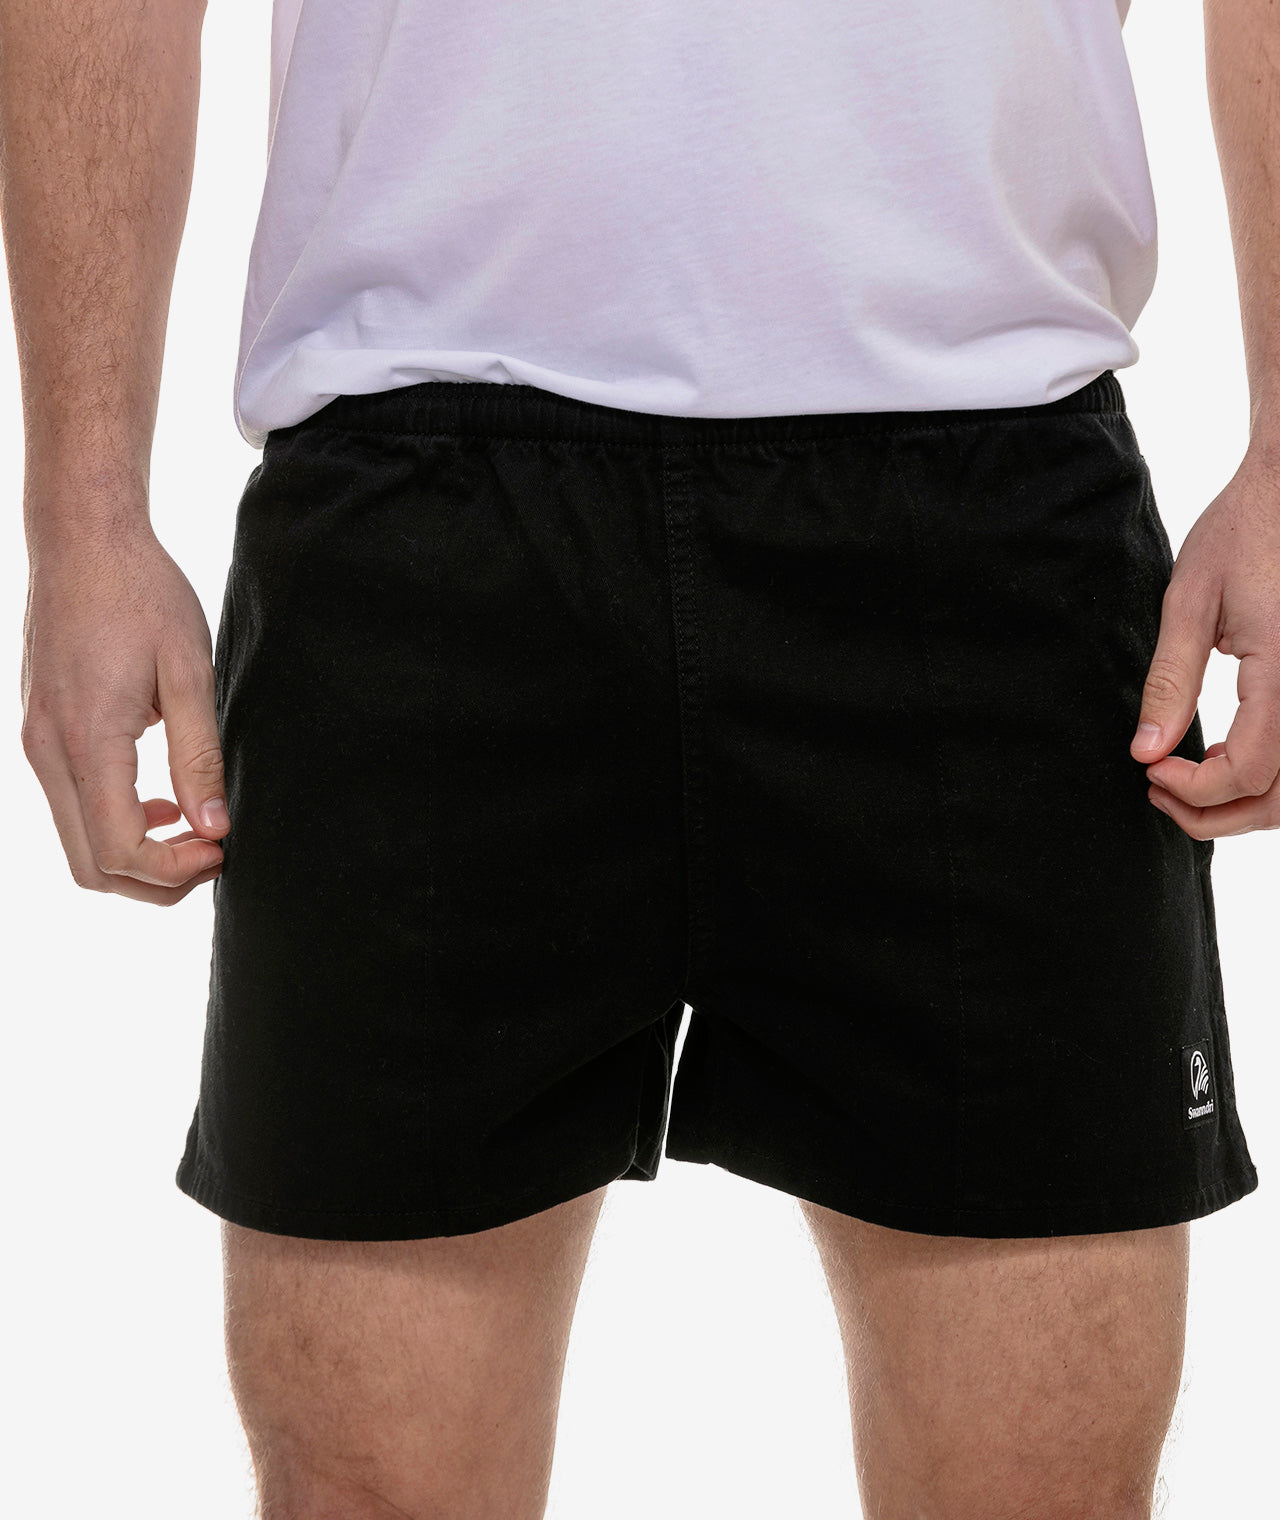 
                  
                    mens rugby shorts with pockets worn on someone's legs
                  
                